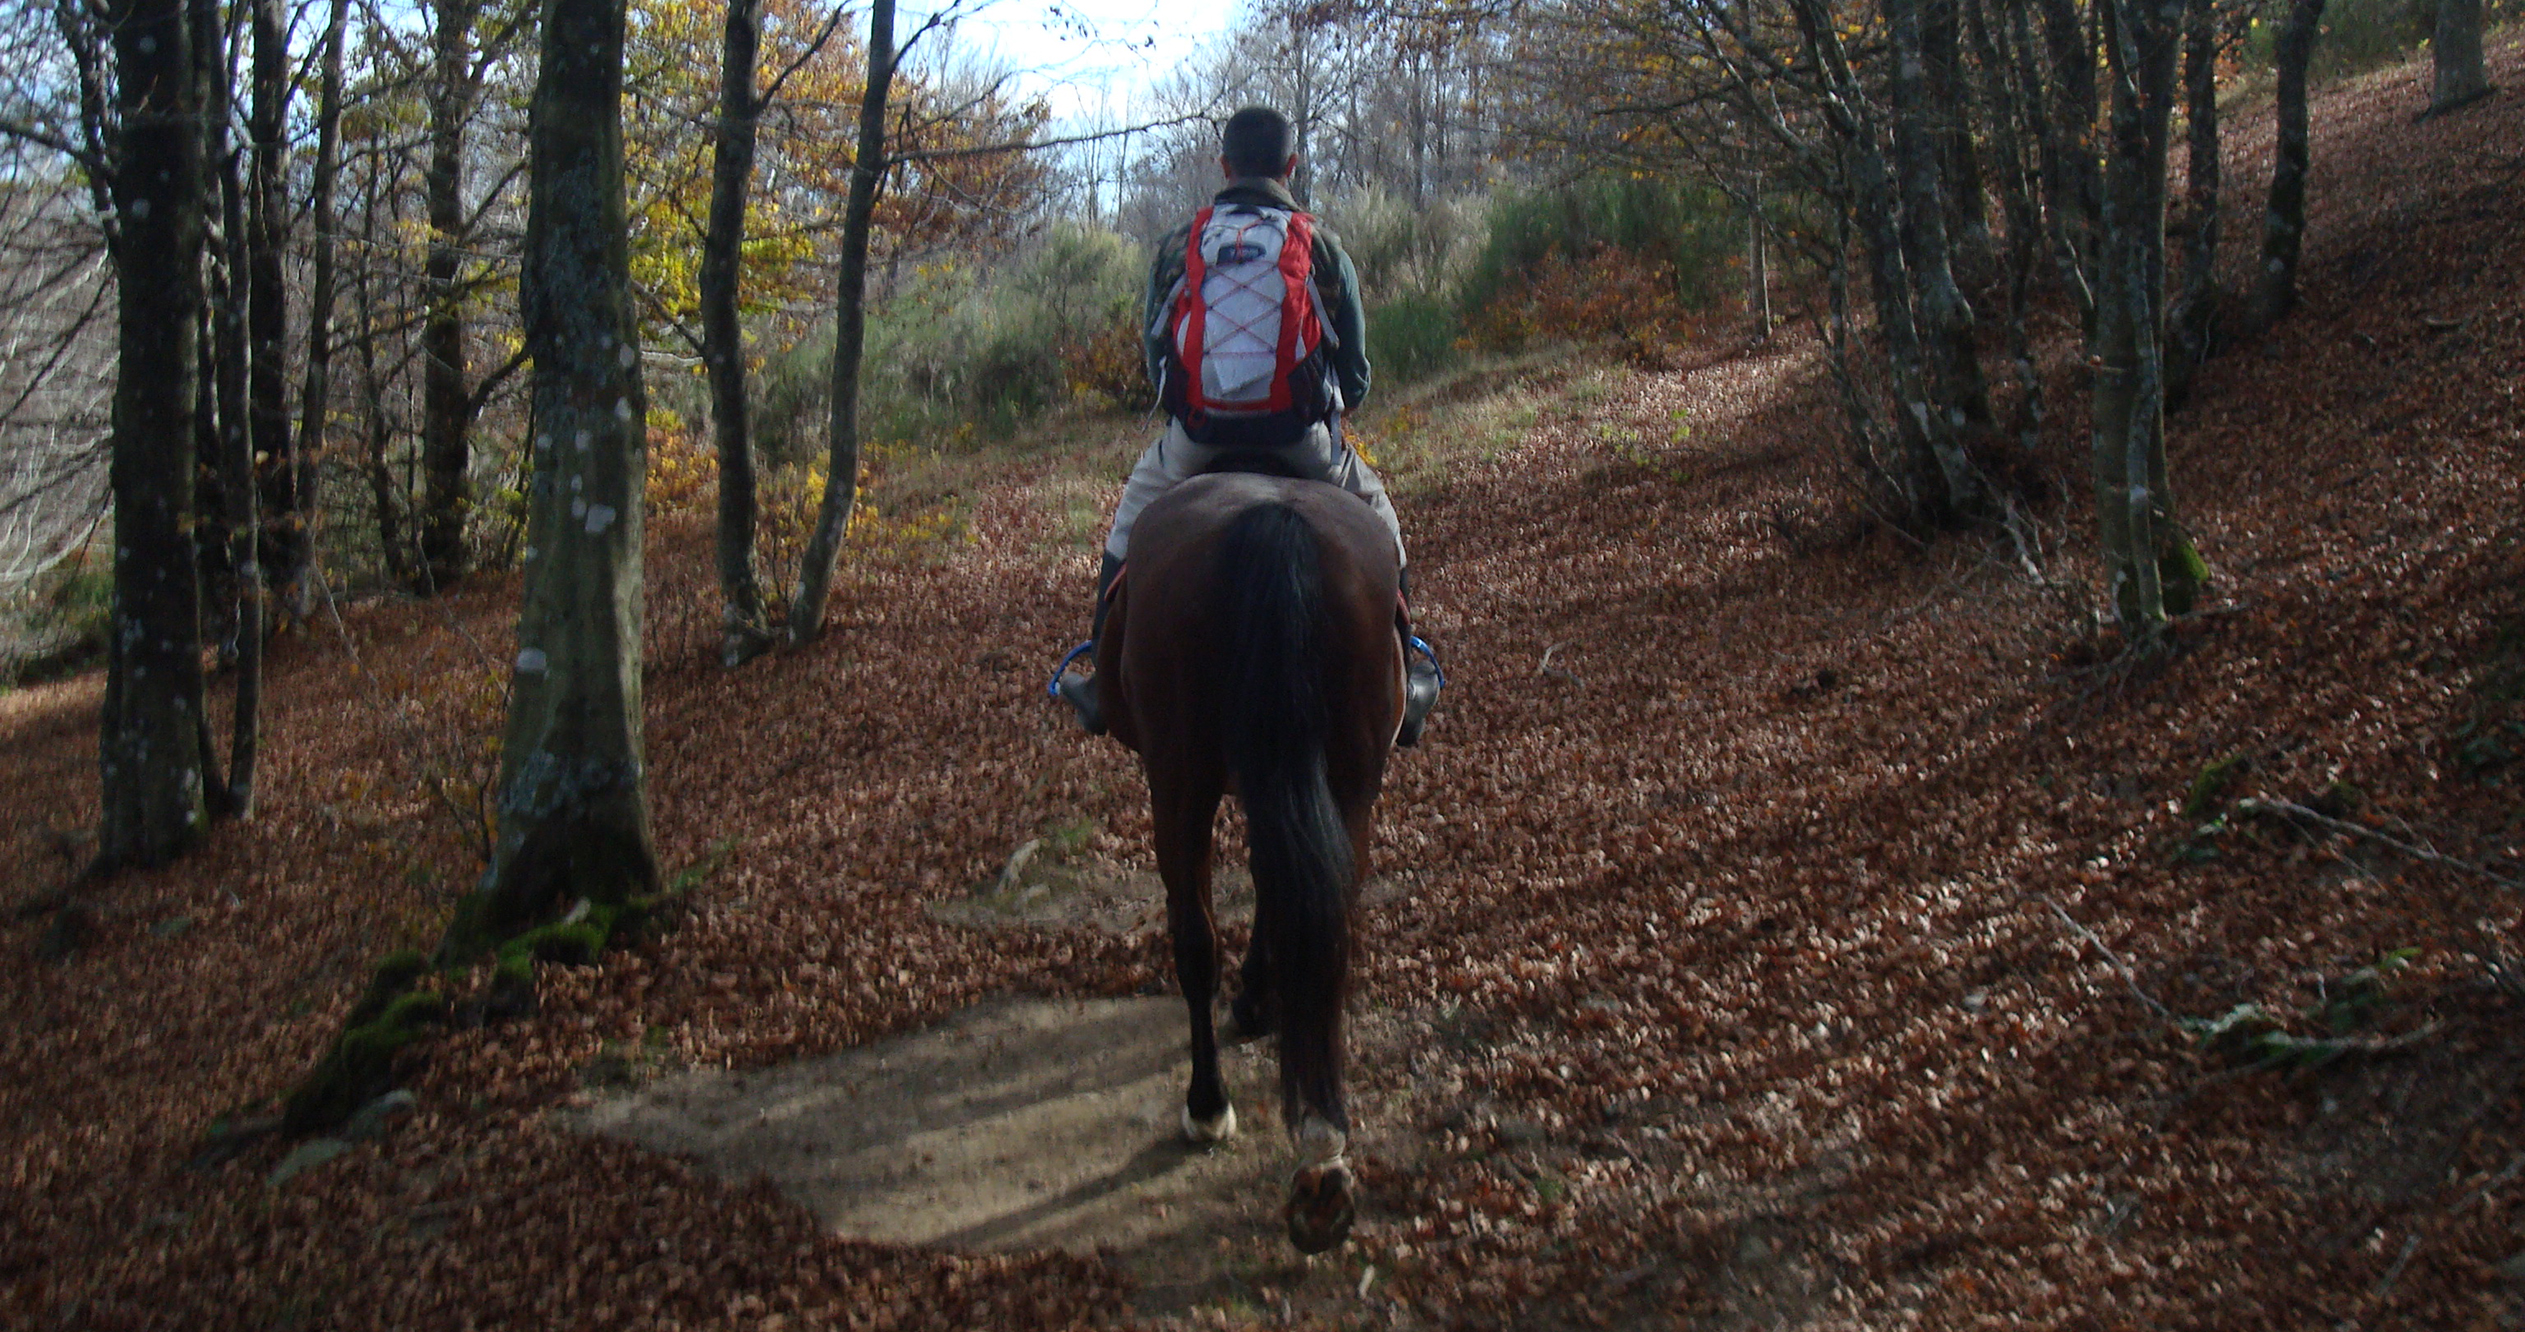 THE POETRY OF HORSERIDING